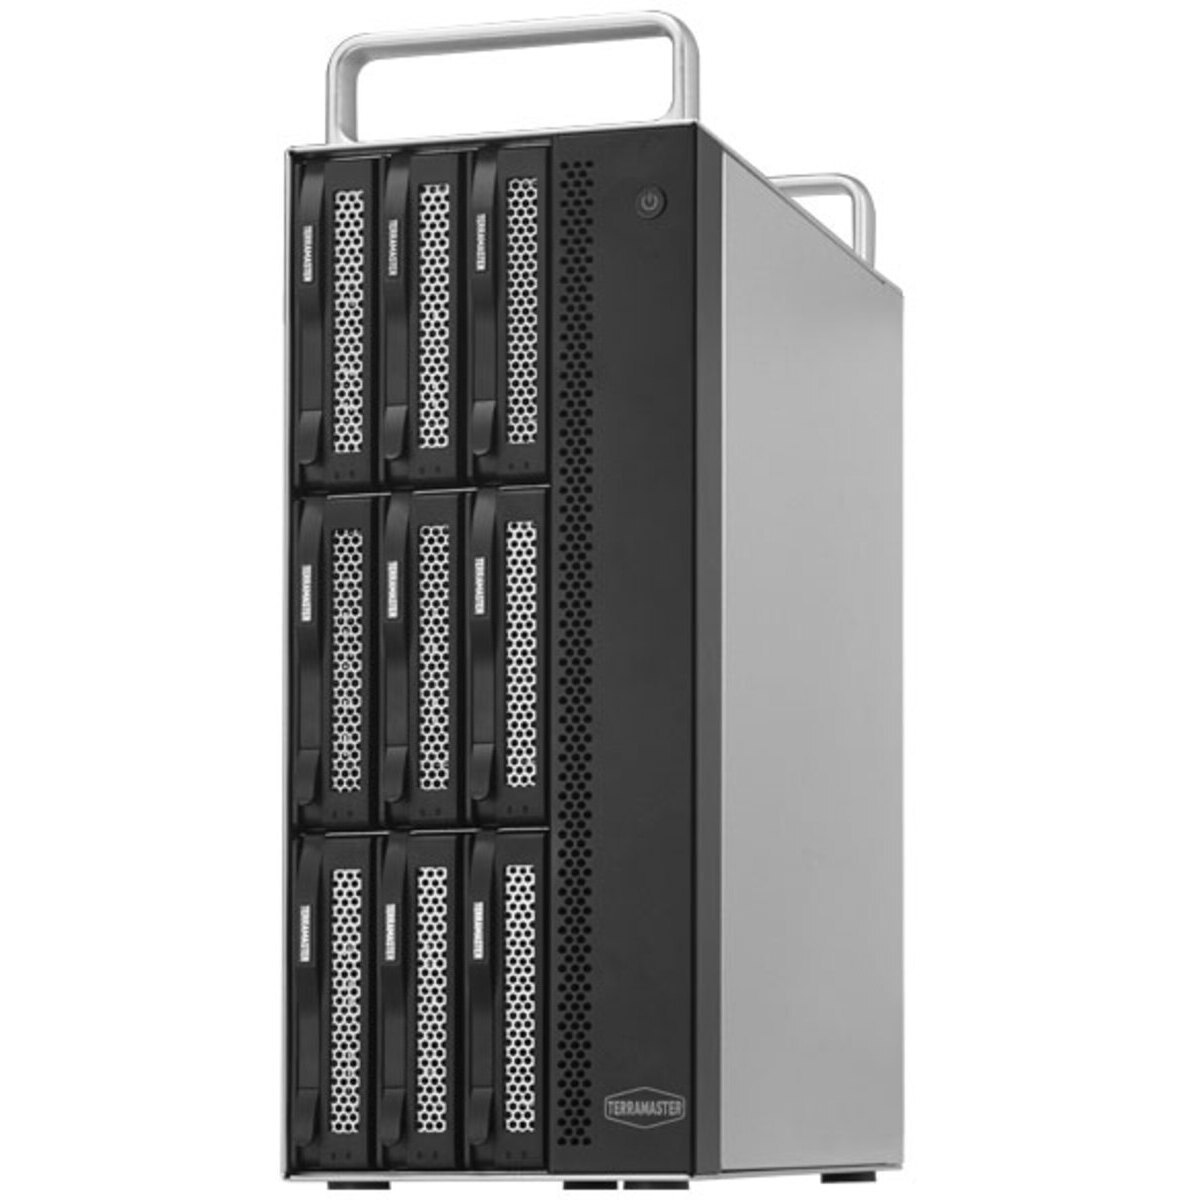 TerraMaster D8-322 4tb 8-Bay Desktop Multimedia / Power User / Business DAS - Direct Attached Storage Device 8x500gb Sandisk Ultra 3D SDSSDH3-500G 2.5 560/520MB/s SATA 6Gb/s SSD CONSUMER Class Drives Installed - Burn-In Tested D8-322